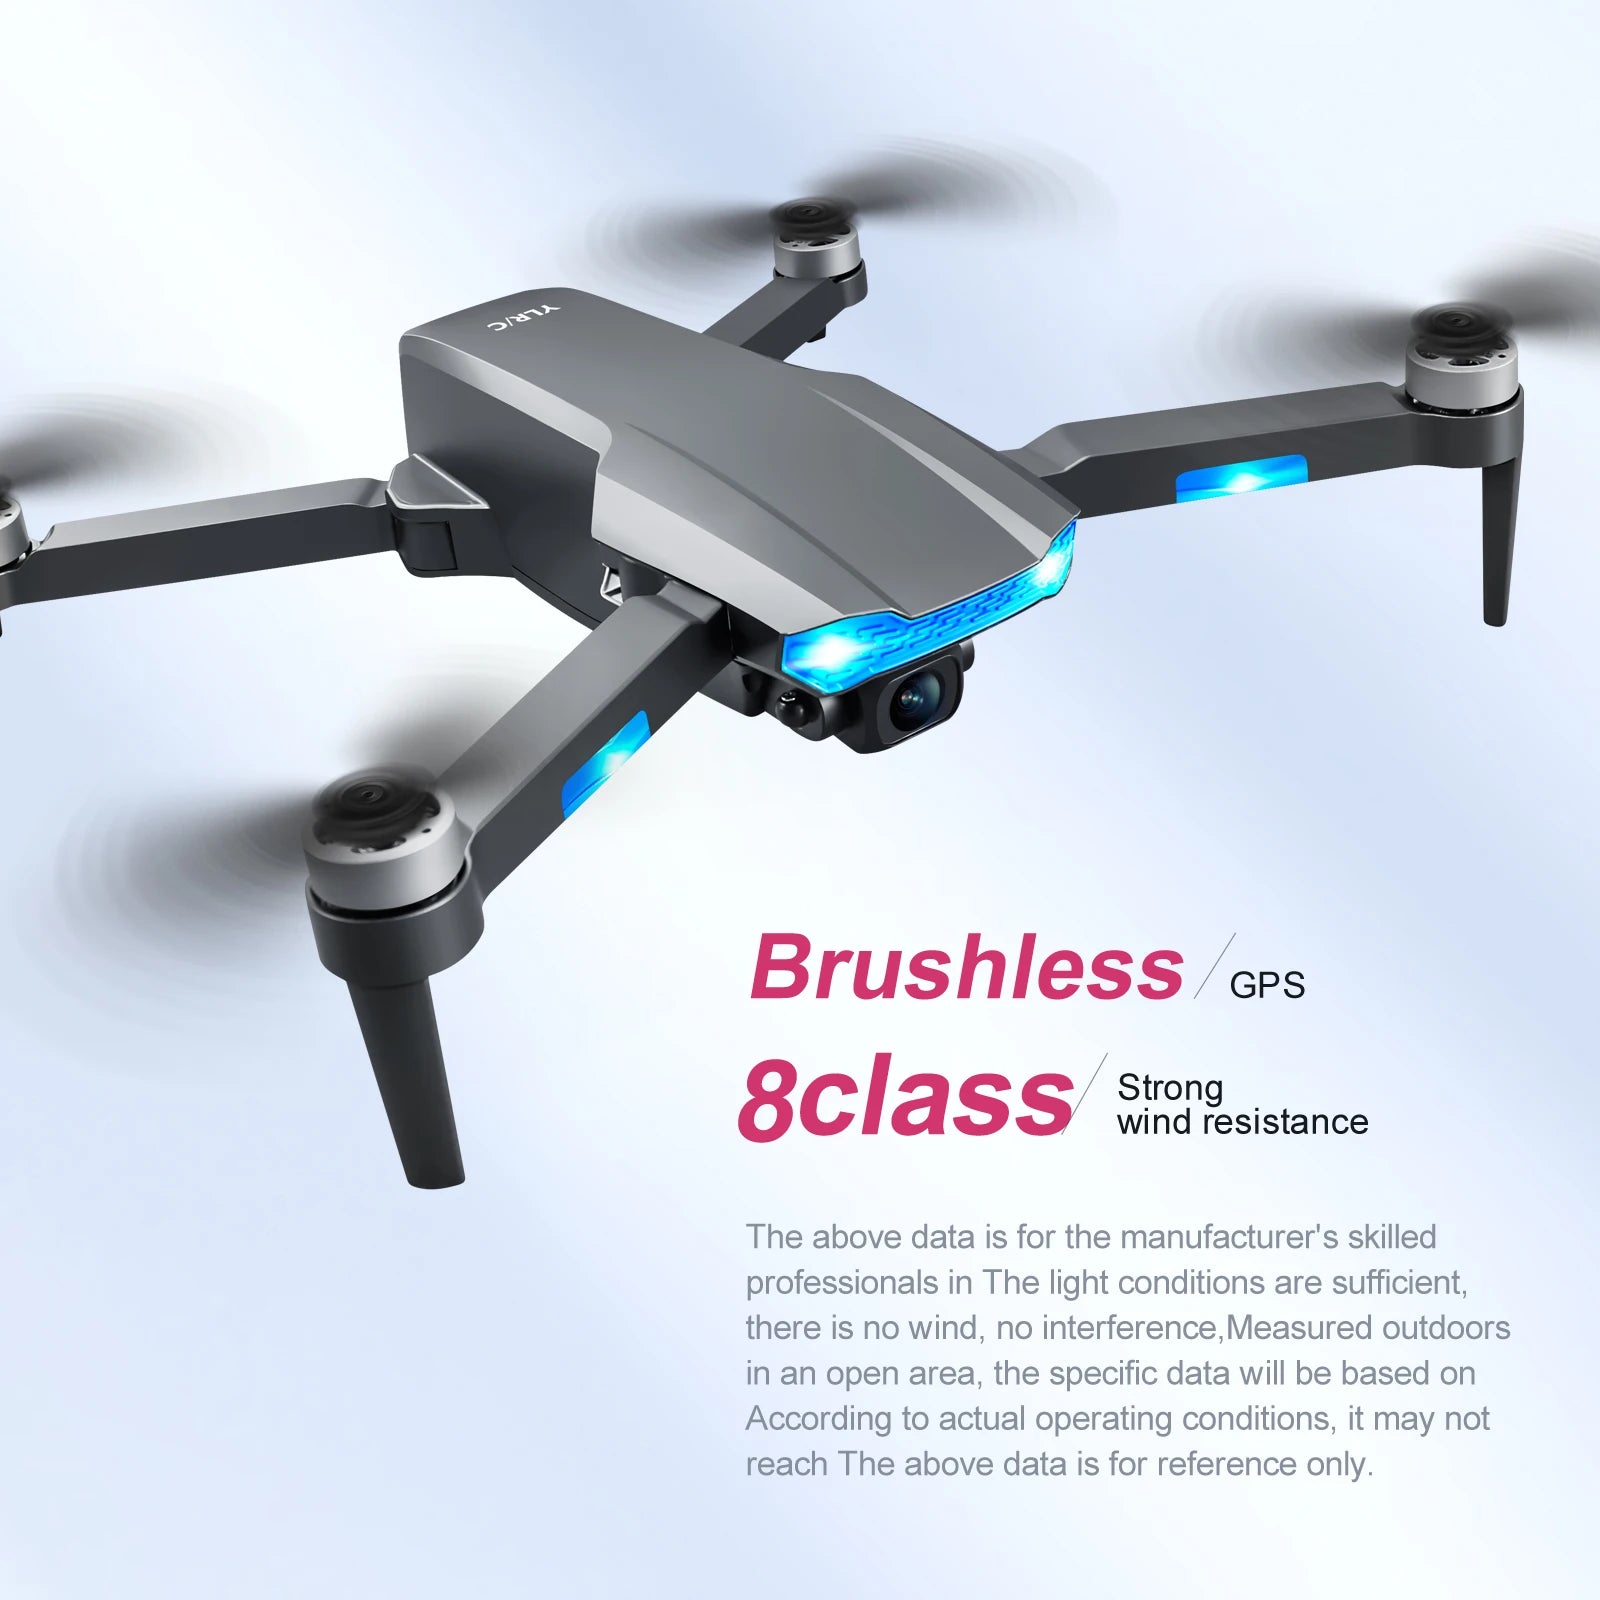 QJ S106 GPS Drone, brushless gps 8class sitrdesistance is